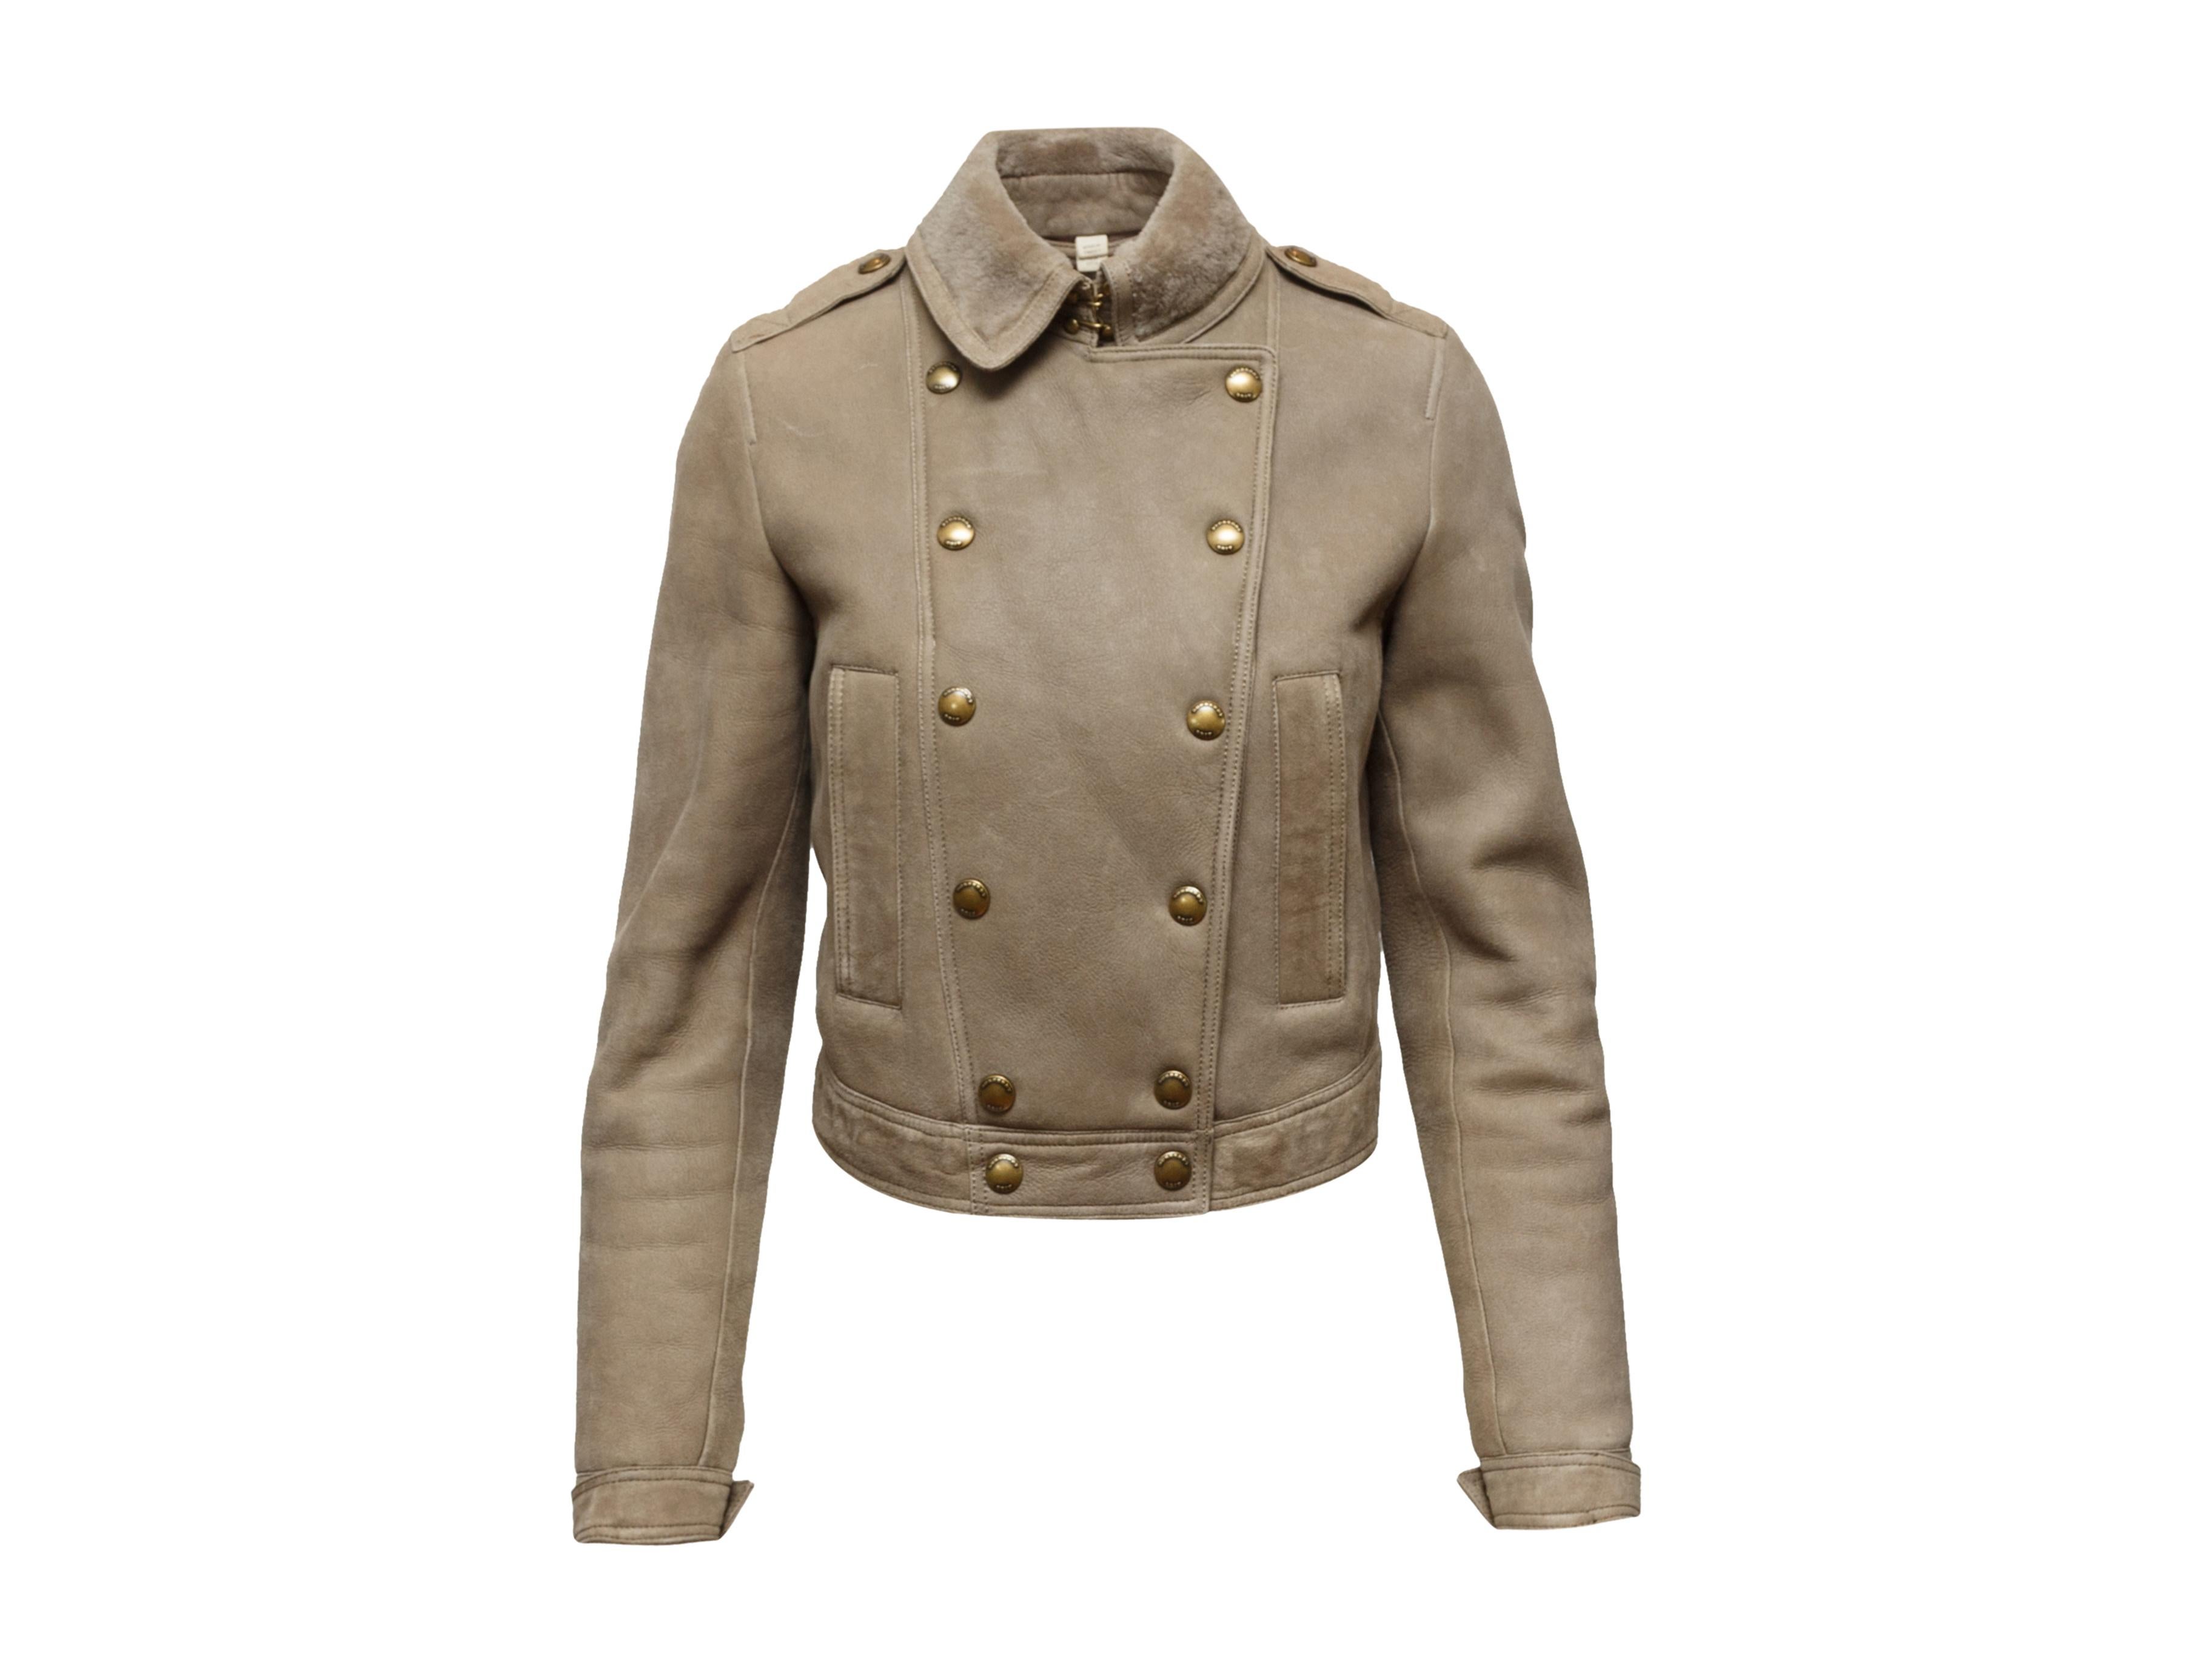 Product details: Beige double-breasted shearling jacket by Burberry Brit. Foldover collar. Dual pockets at hips. Gold-tone button closures at front. Designer size UK6. 24